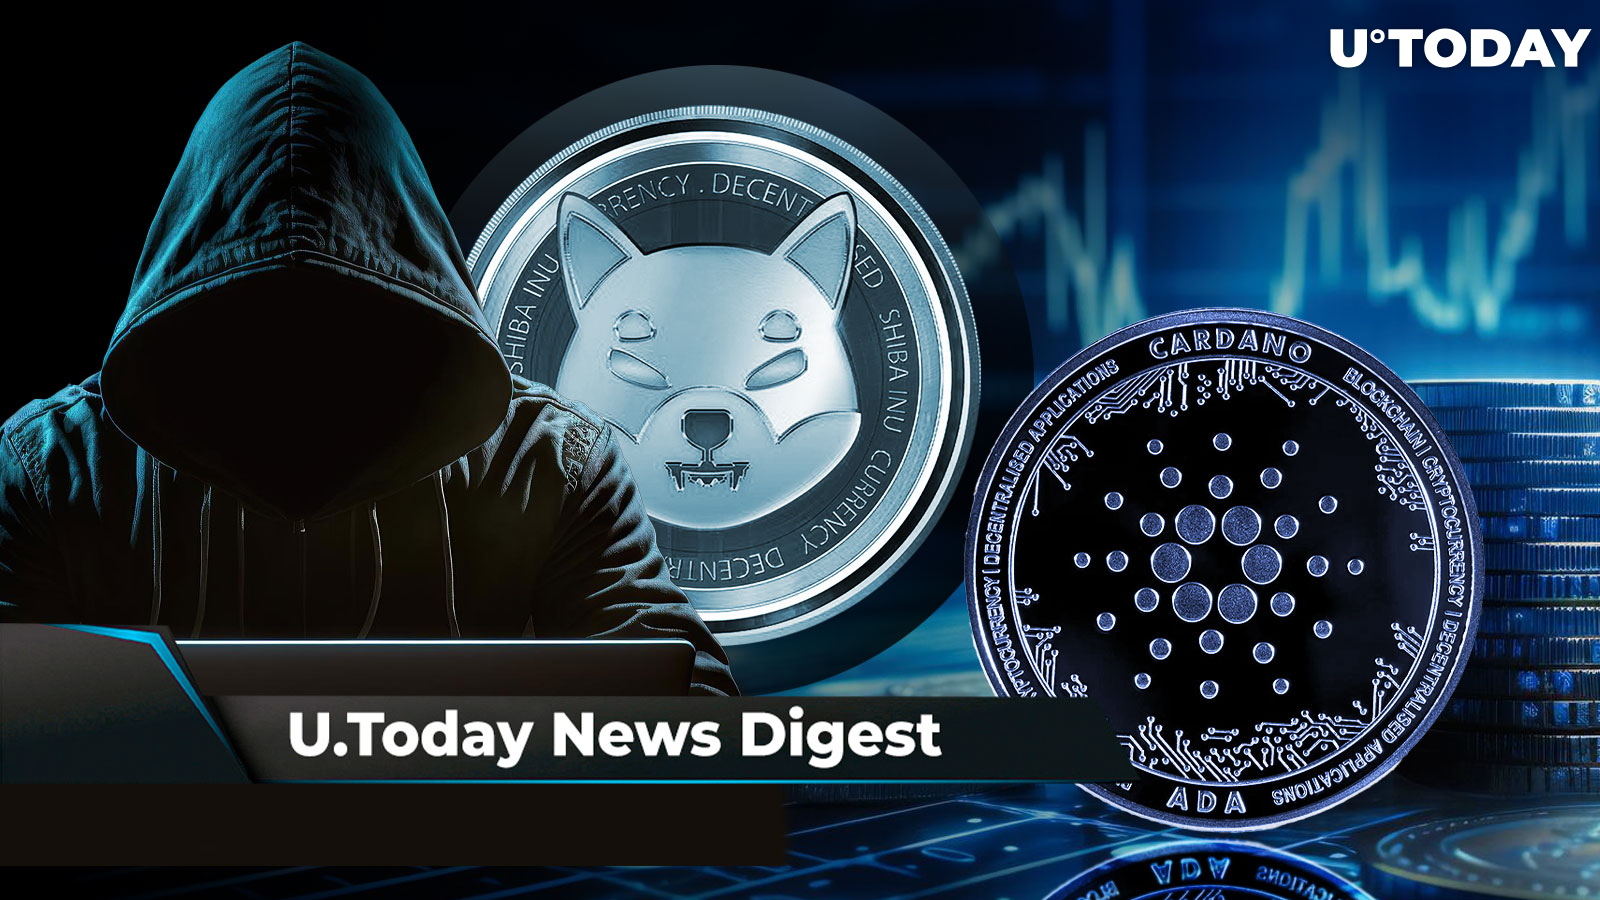 Shiba Inu's Shytoshi Kusama Teases Game-Changing Announcement, ADA Reaches Highest Level Since 2022, Solana Surpasses Ethereum in NFT Sales: Crypto News Digest by U.Today